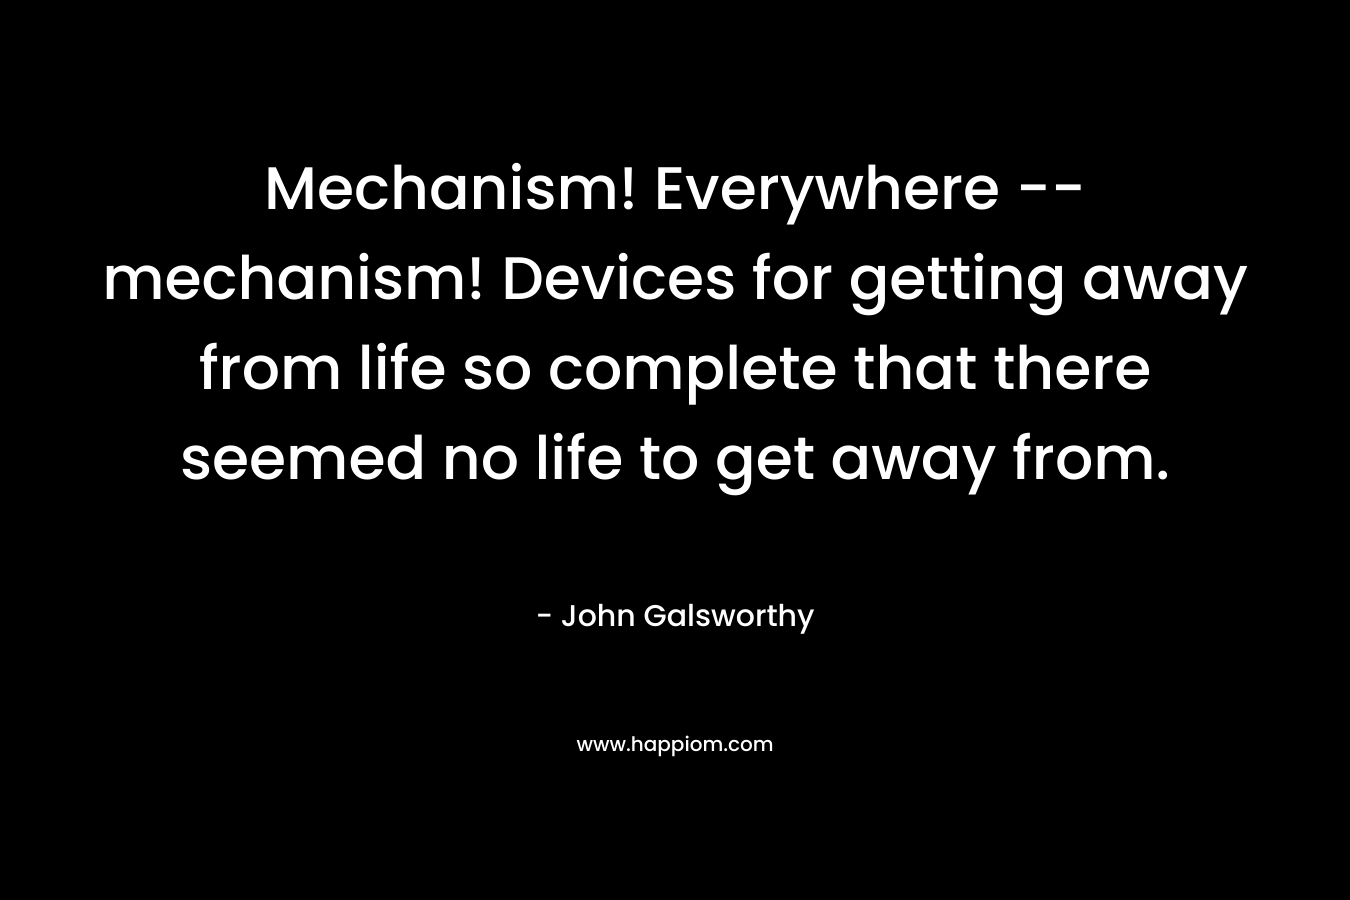 Mechanism! Everywhere — mechanism! Devices for getting away from life so complete that there seemed no life to get away from. – John Galsworthy